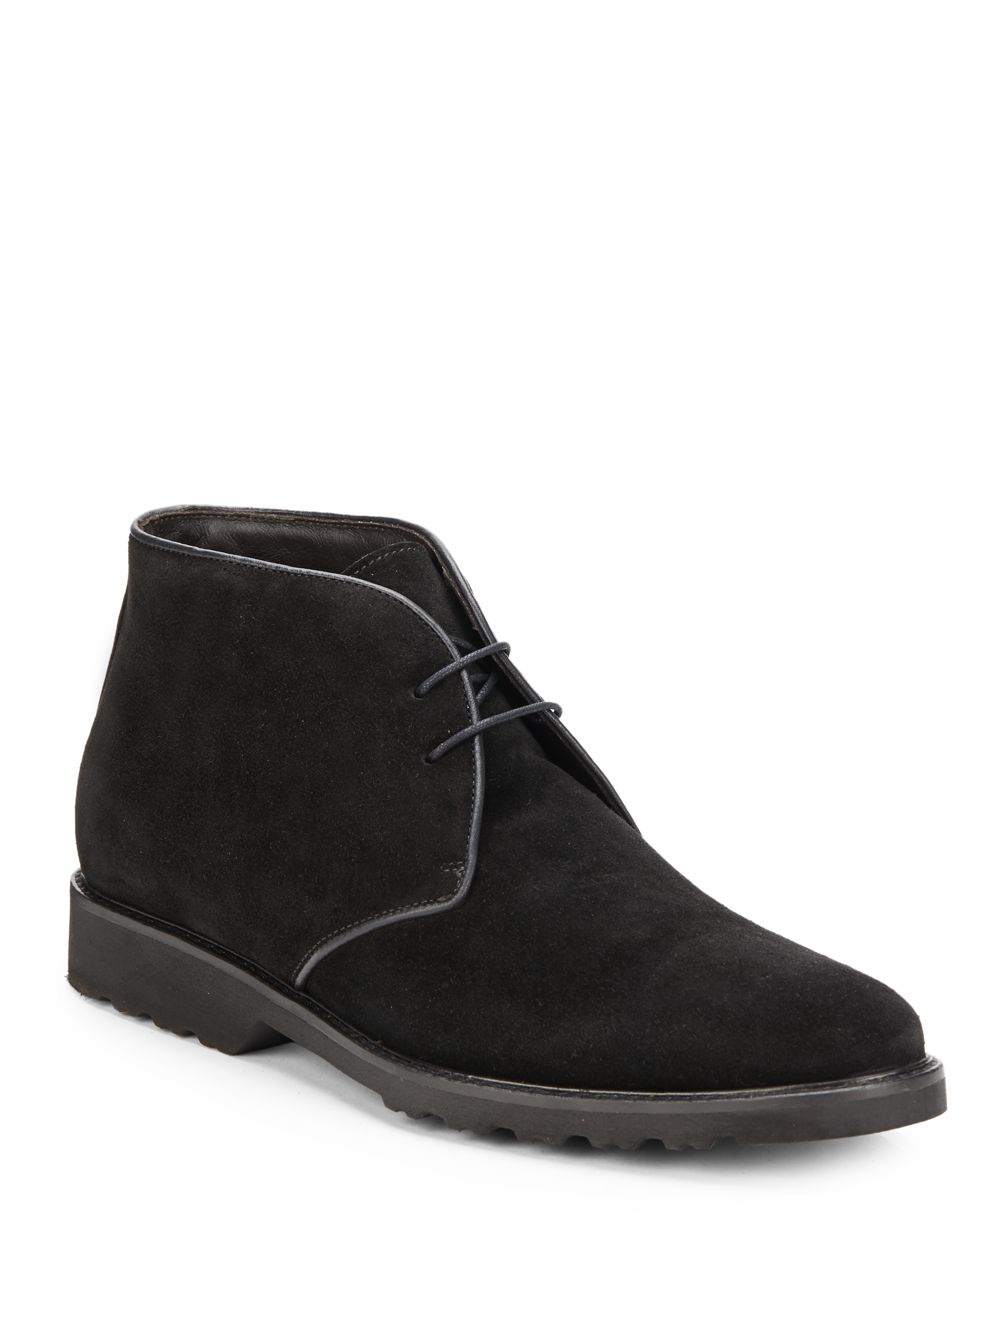 Bruno Magli Malcolm Suede Chukka Boots in Black for Men | Lyst